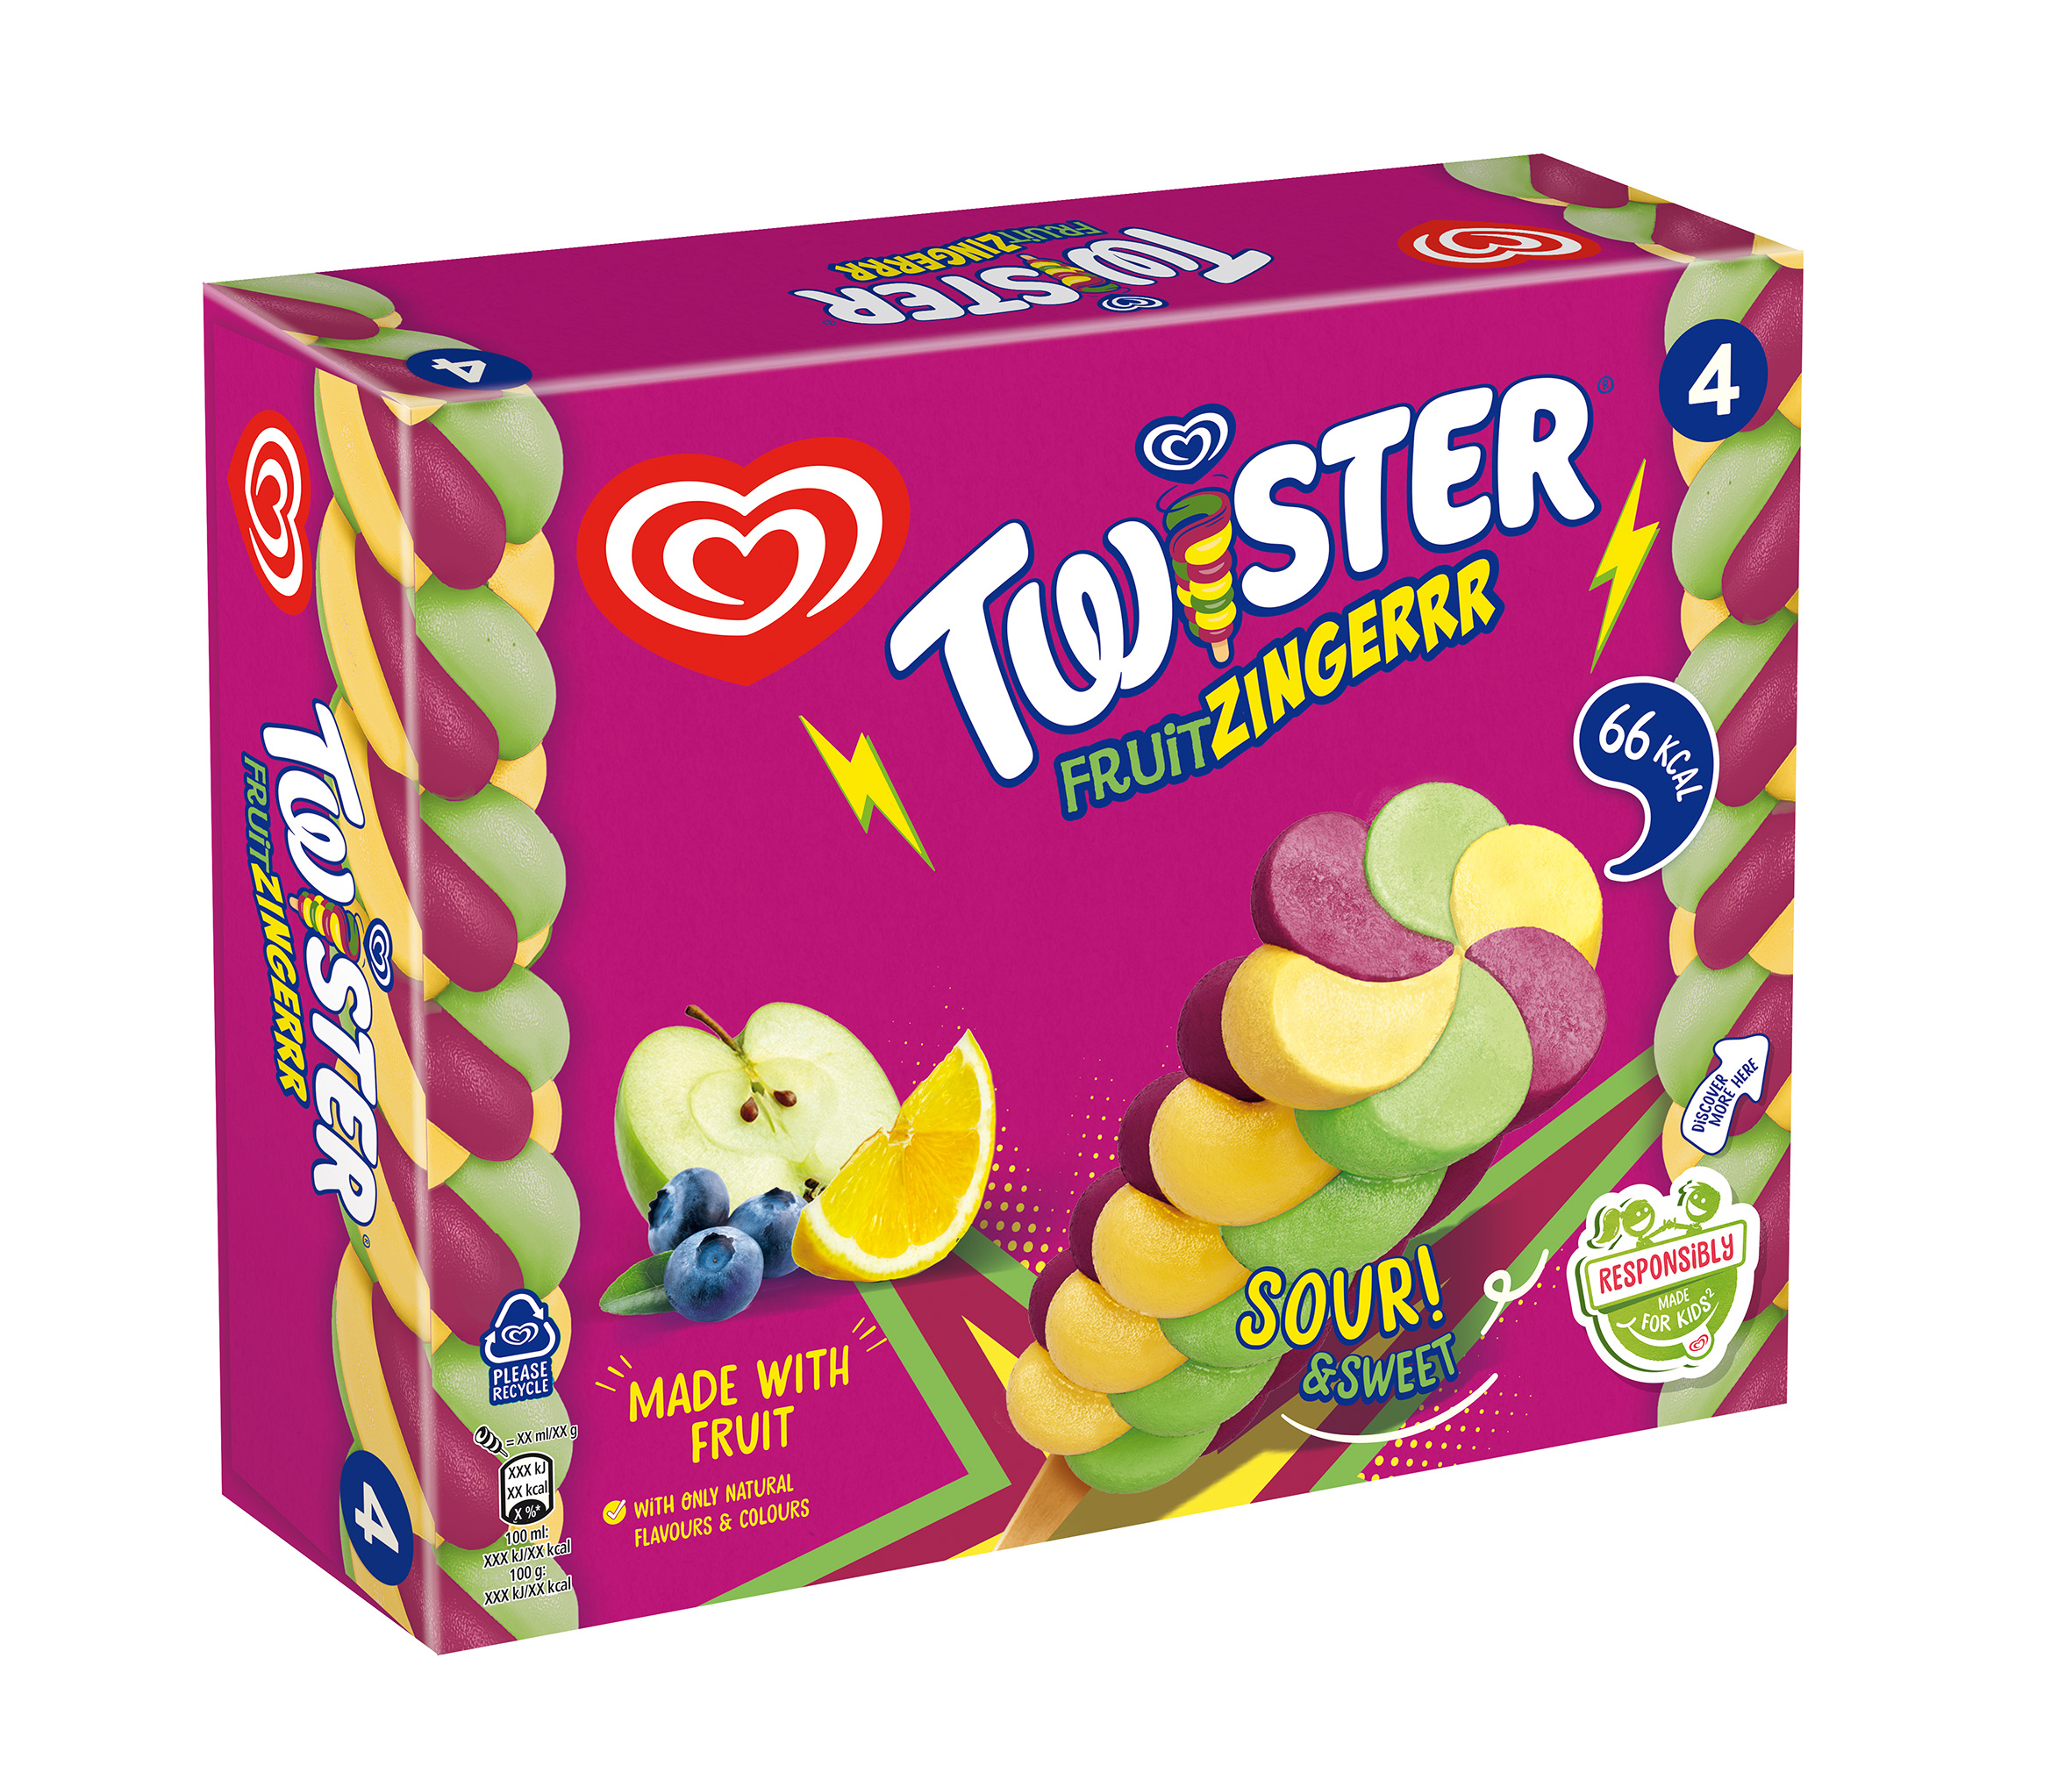 Wall’s launches new sweet and sour Twister Fruit Zingerrr